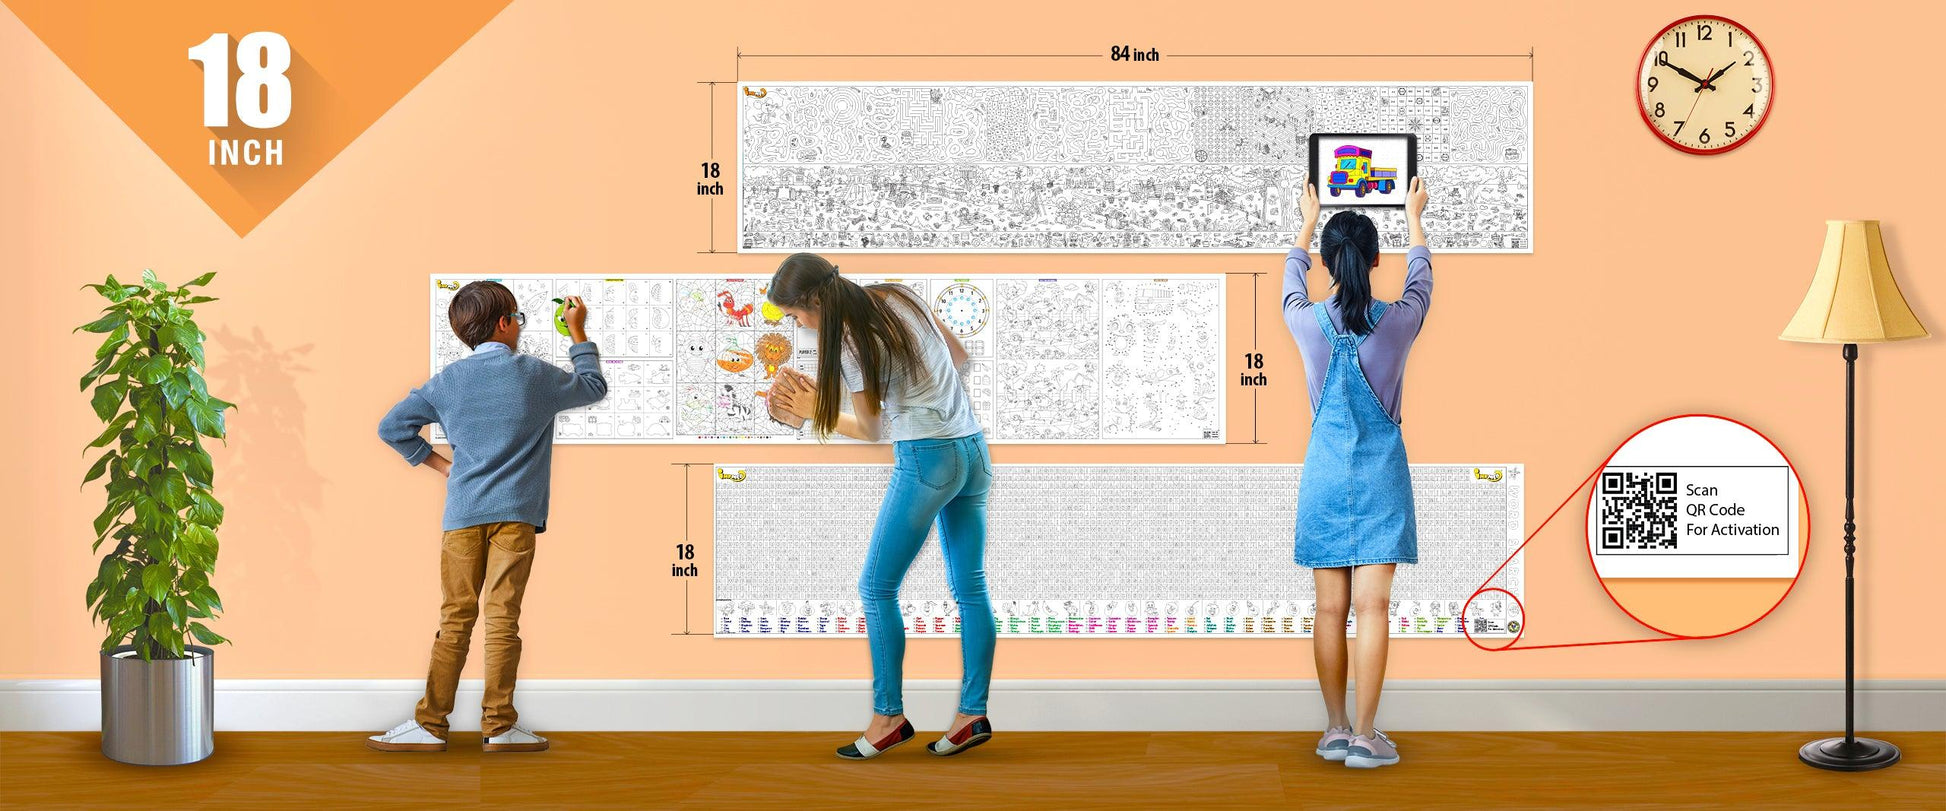 The image depicts a orange wall with three rolls attached to it, being colored by children. The size of the rolls is specified as 18 inches in the top left corner.